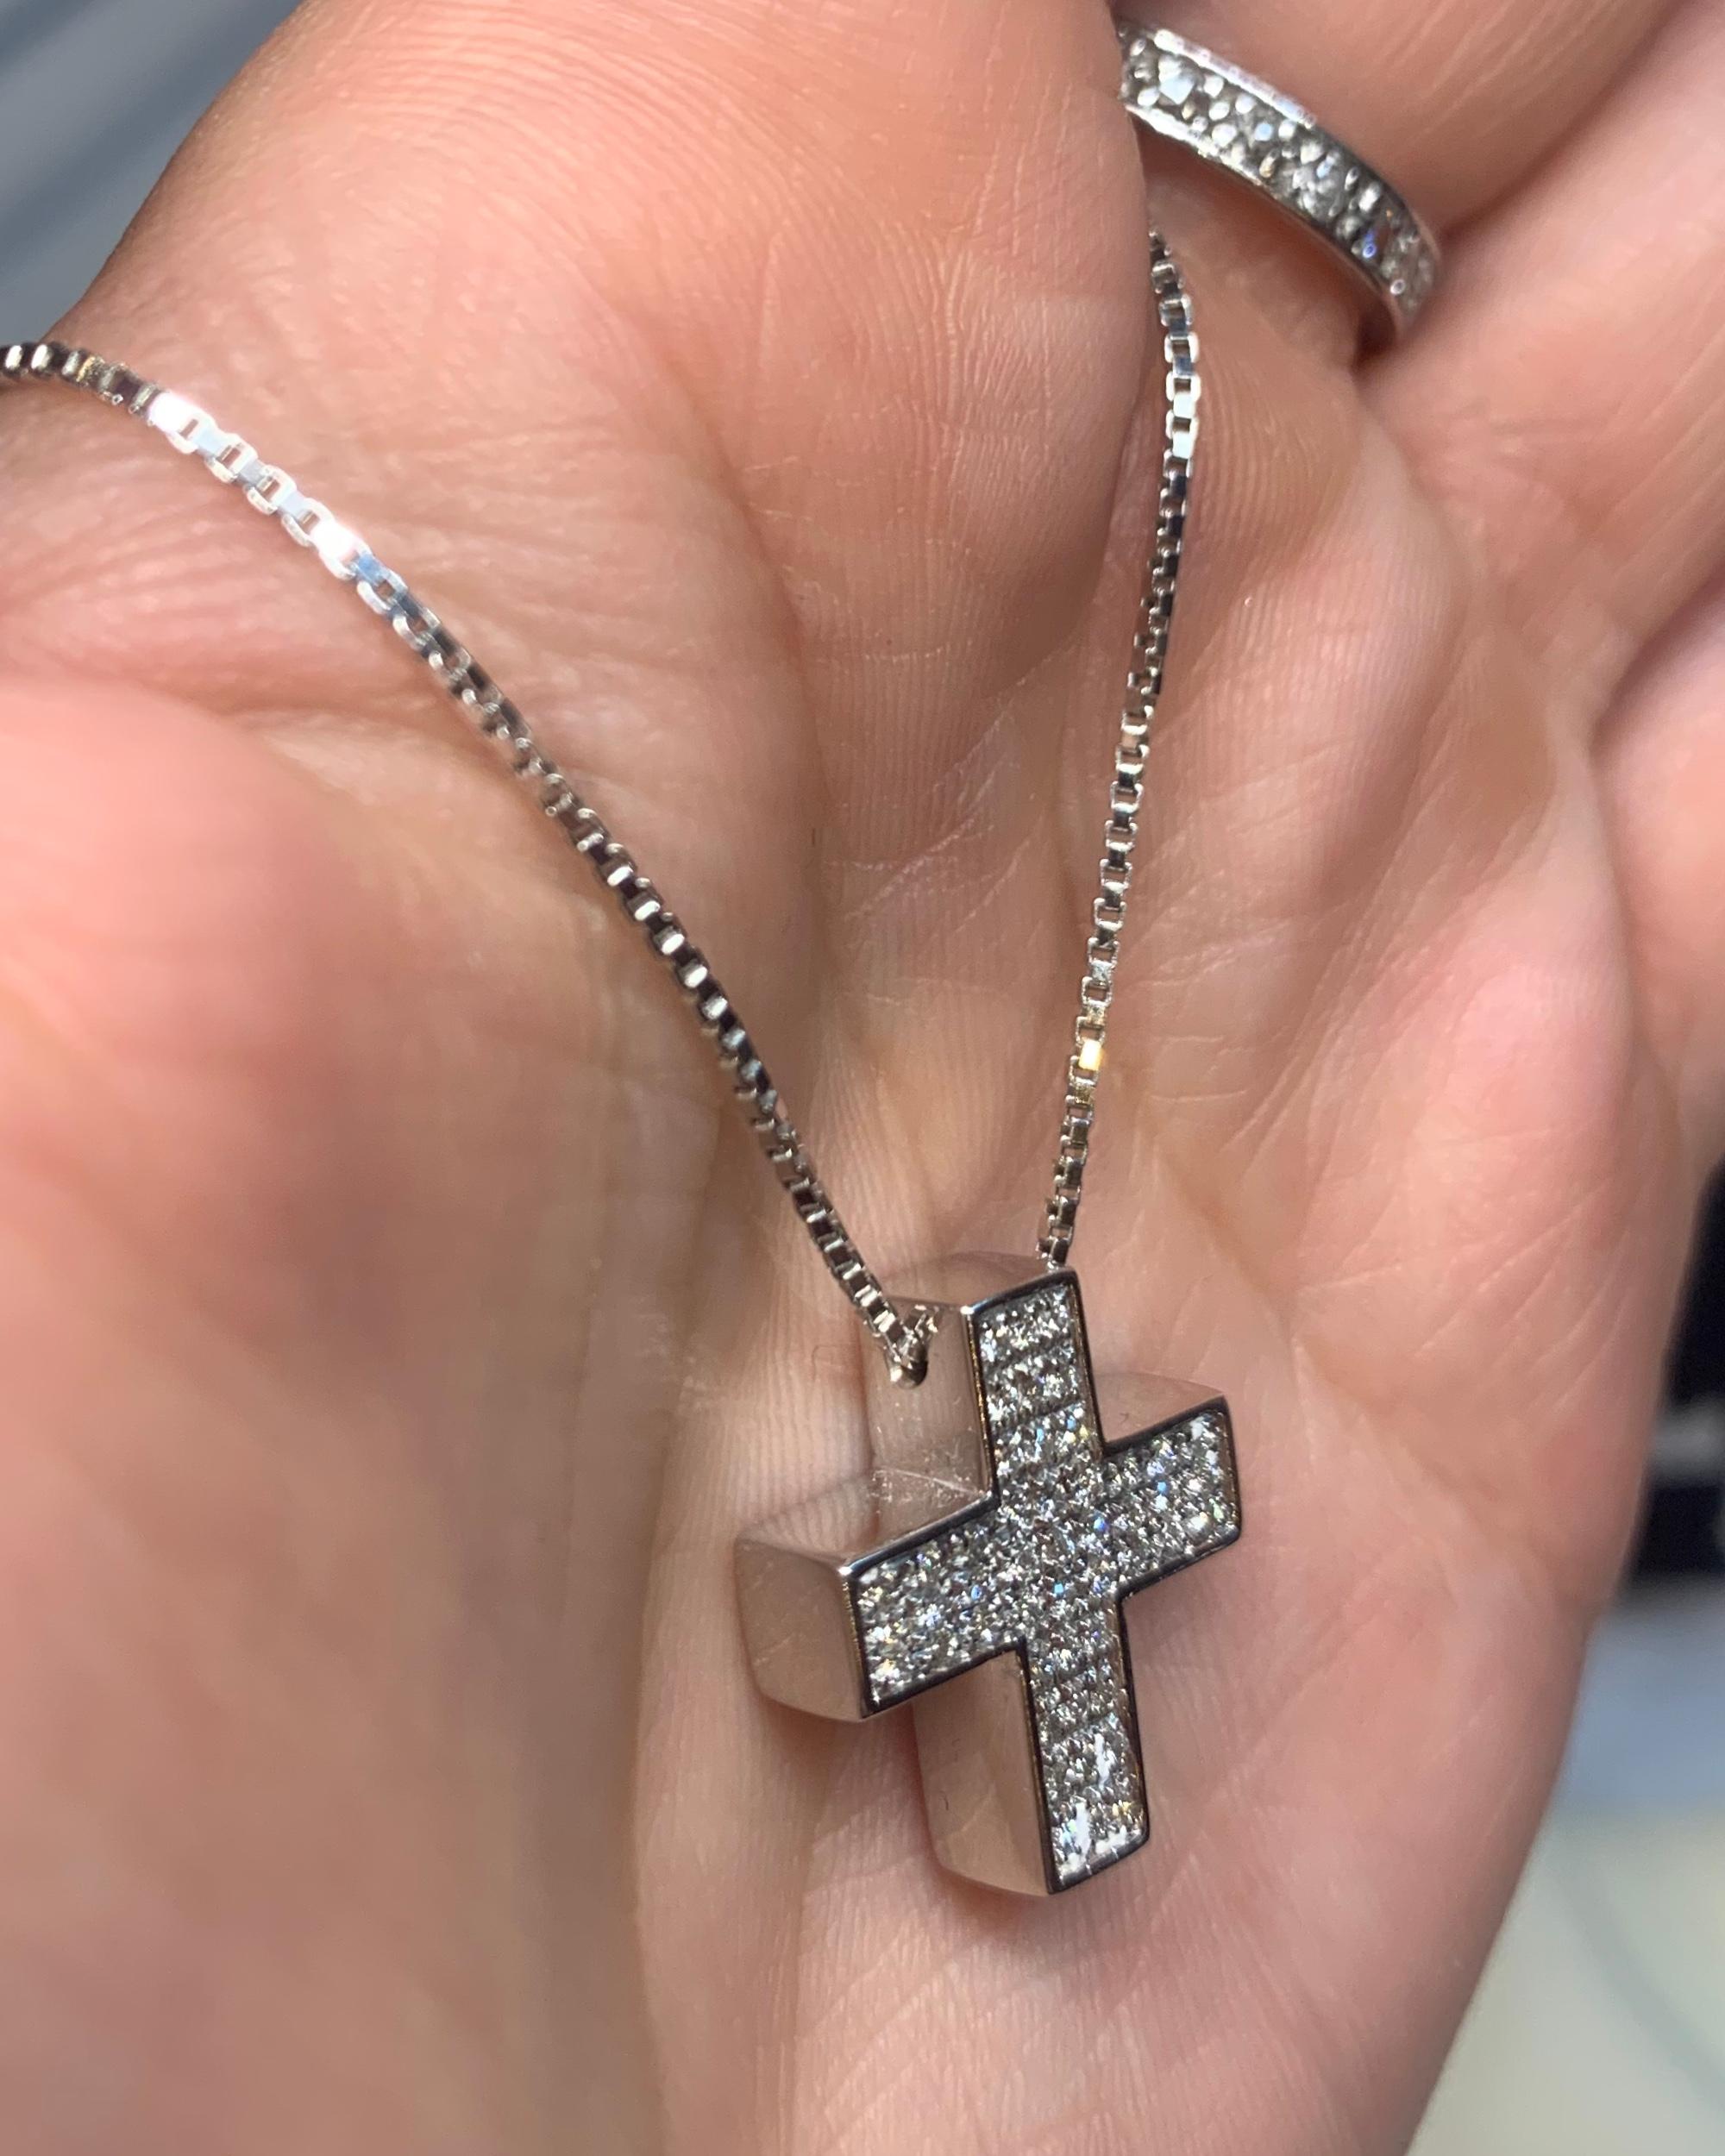 Please see video- this is a beautiful cross.
More Details:
0,50ct White VS-G Brilliant Cut diamonds
Handset in 9,90gr 18k White Gold
Handmade in our 150 year old workshop in Italy
Measuring approximately 2.5cm by 2cm 

A beautiful example of a twist